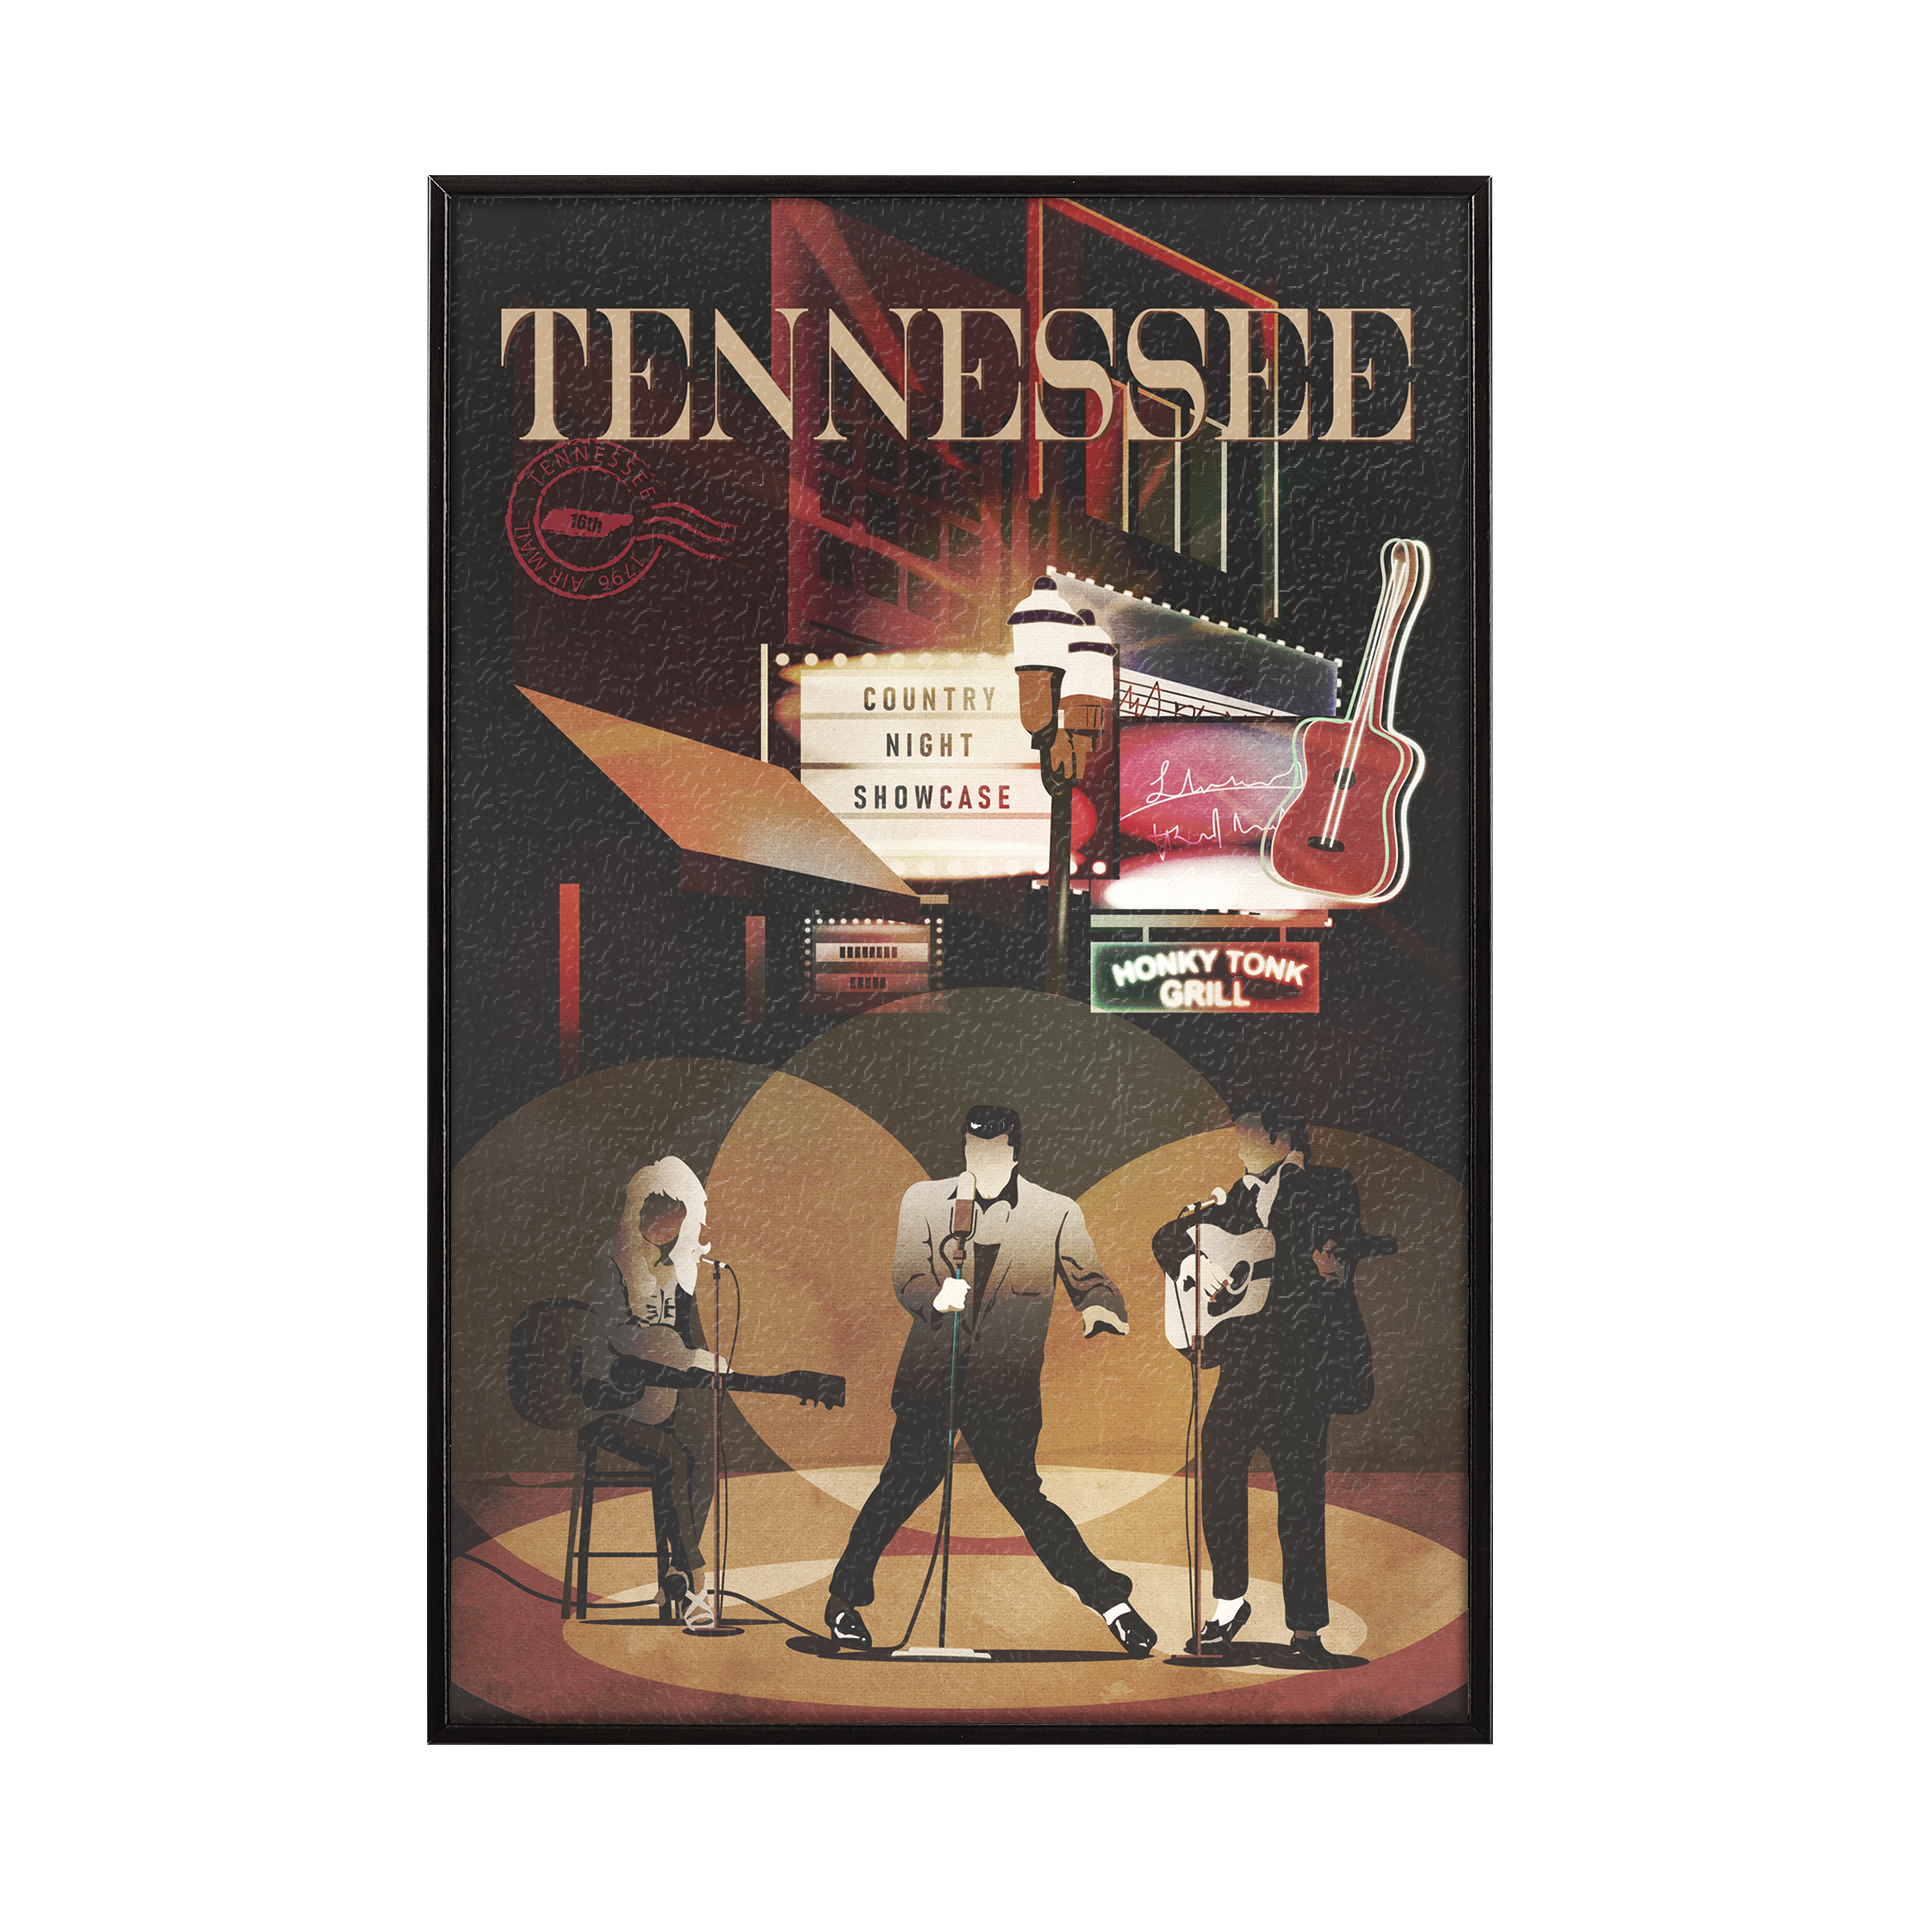 Tennessee Go (S) (11 x 16)